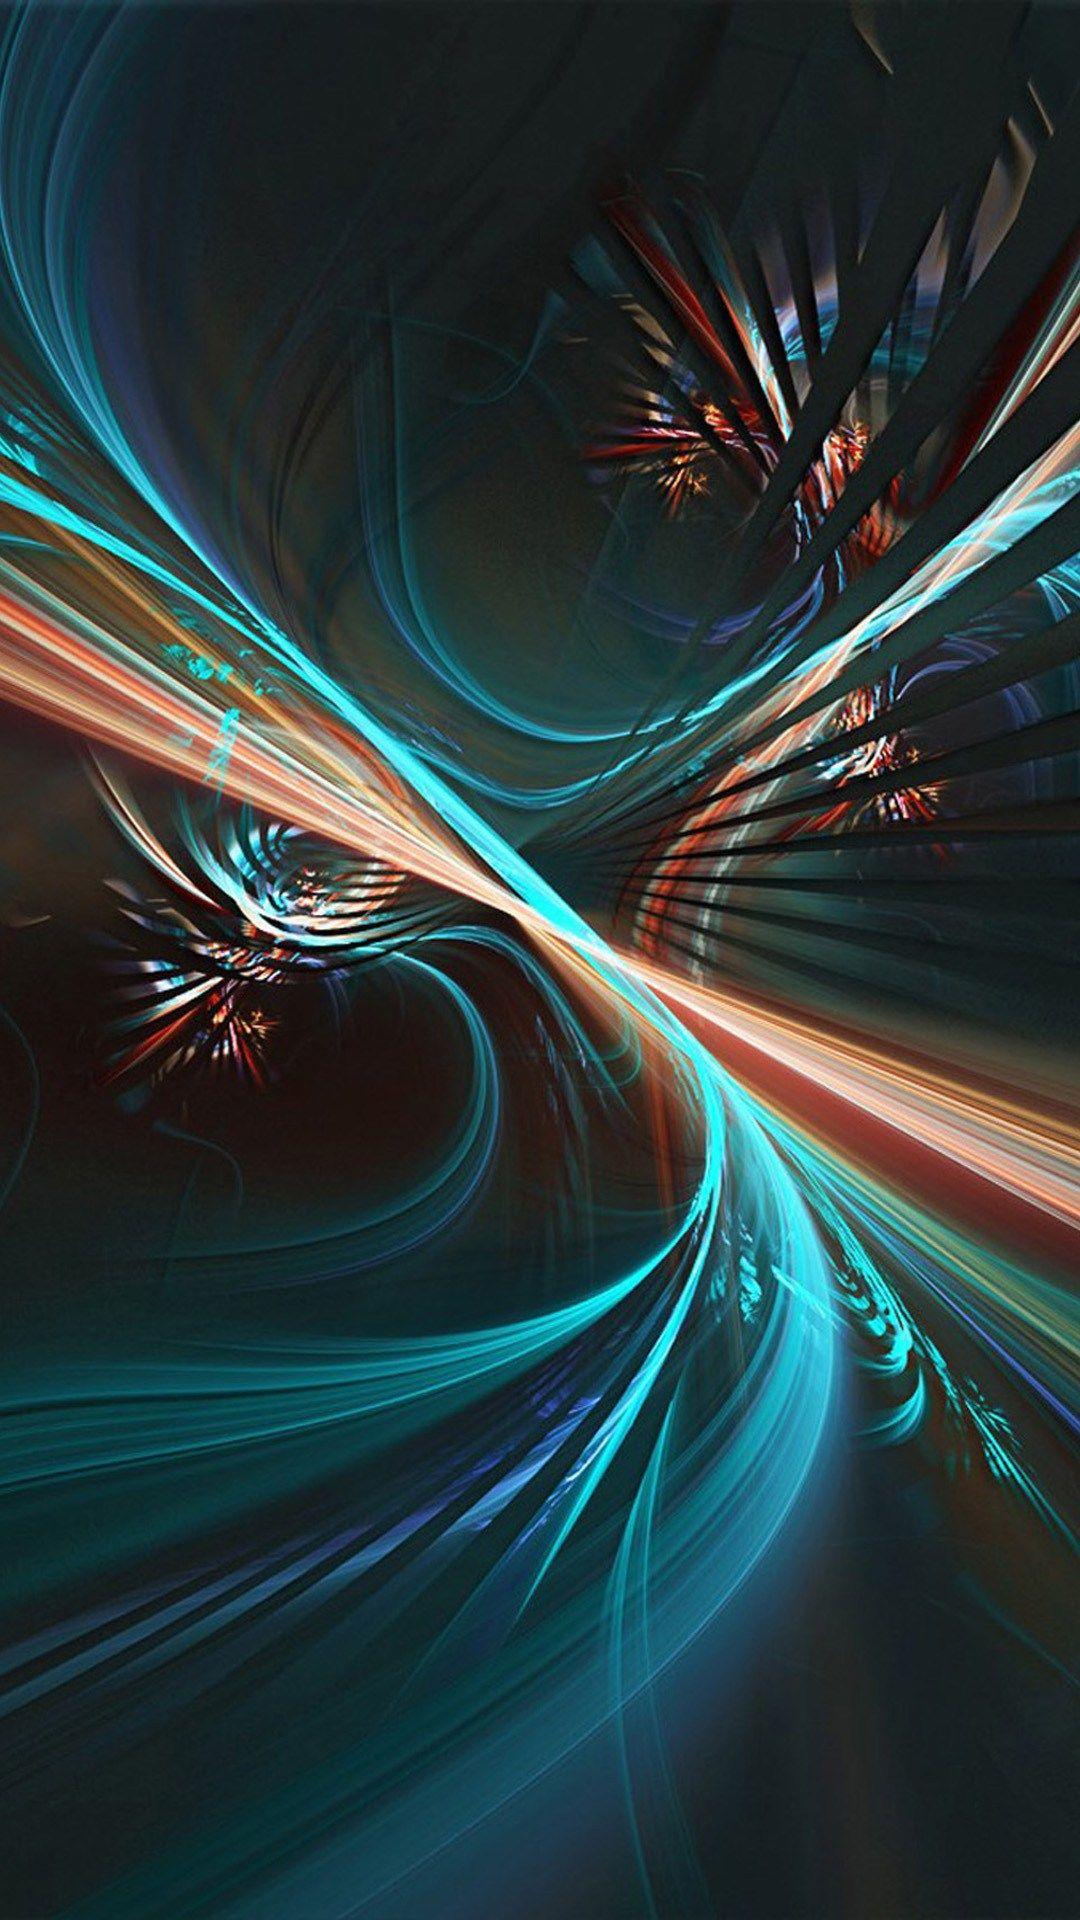 Abstract Art iPhone Wallpapers - Top Free Abstract Art iPhone